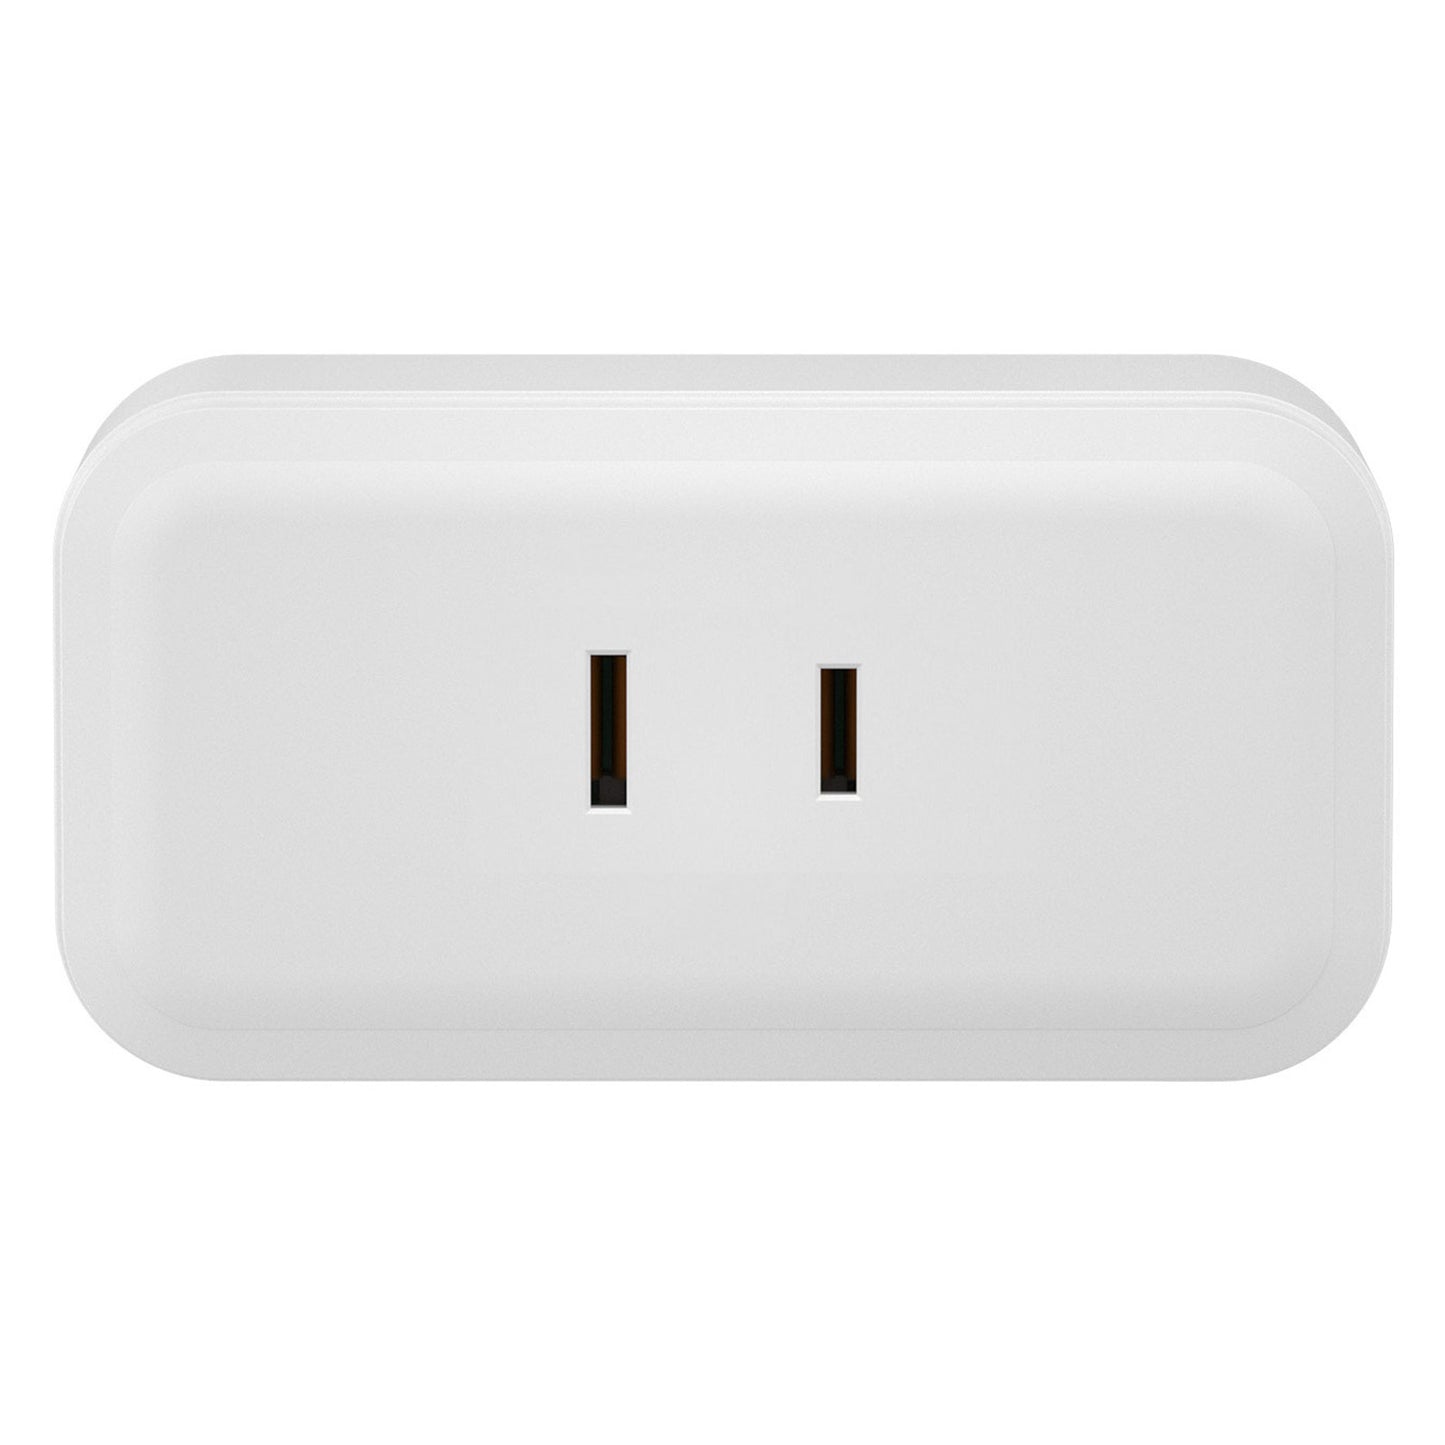 SONOFF S40 WiFi Smart Socket Mini Plug for Home Office Compact Plug Support APP / Voice Control